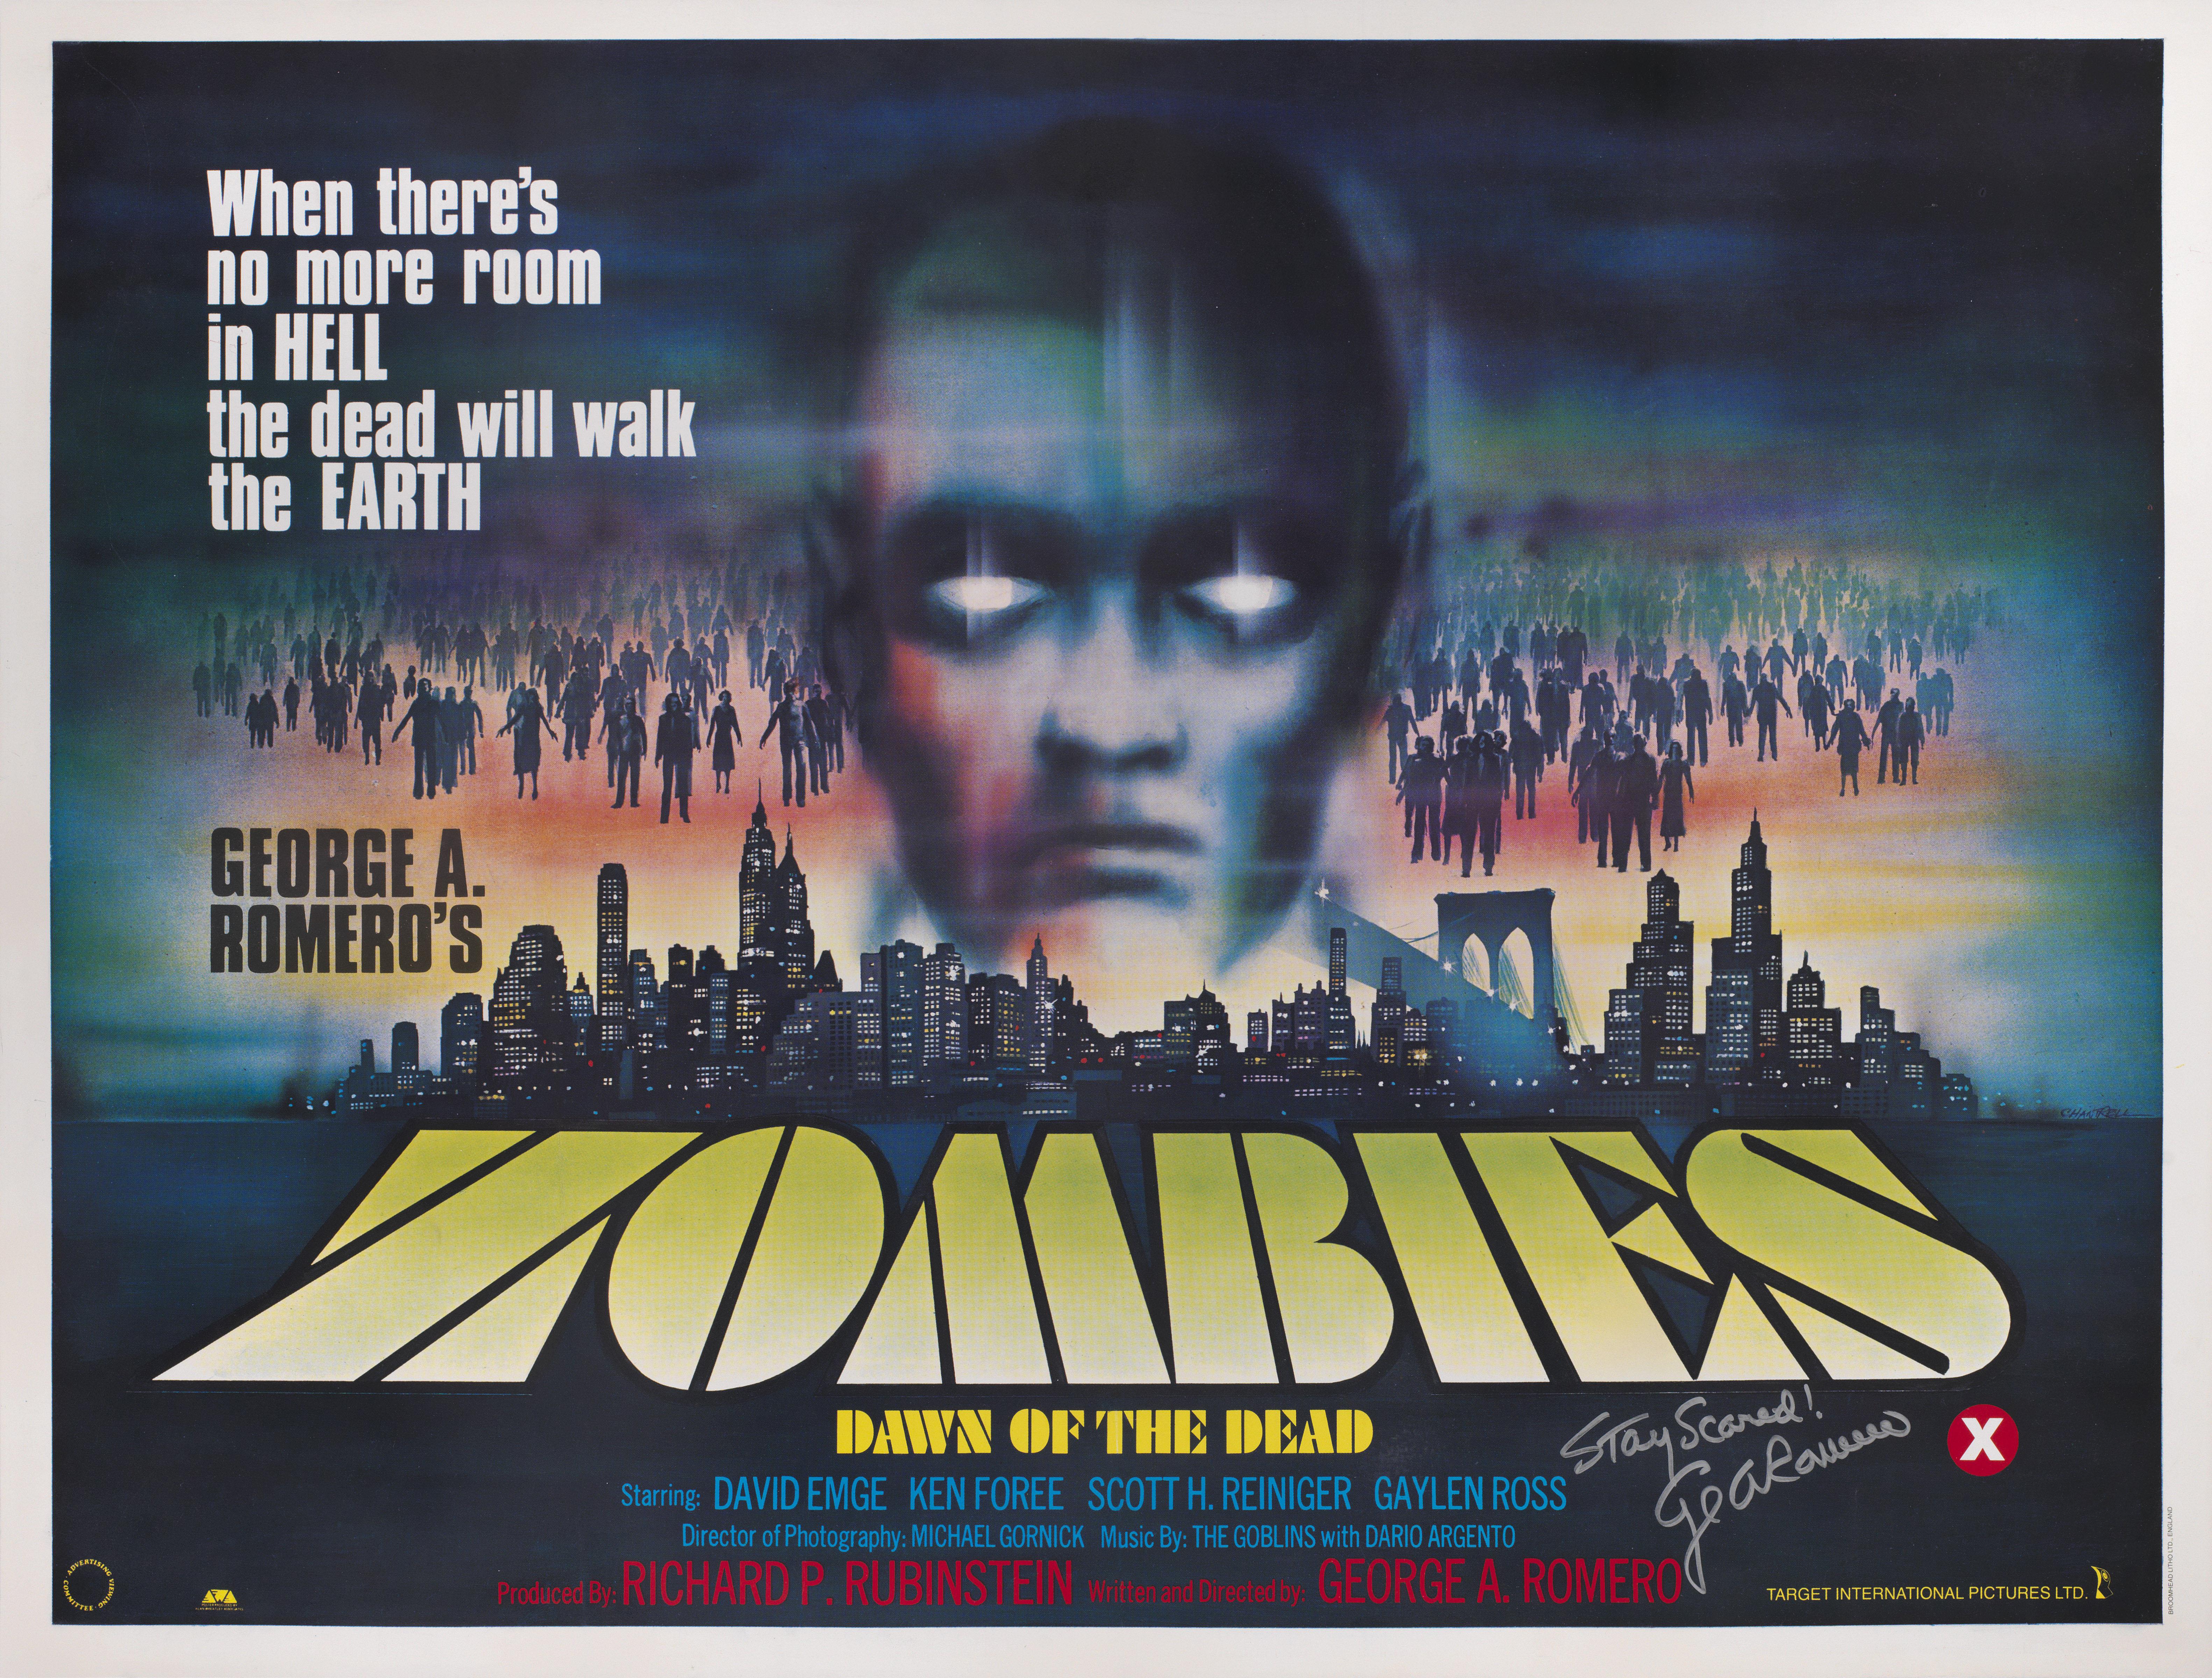 Original British film poster for the 1978 Horror film Dawn of the Dead.
This film stared David Emge, Ken Foree and Scott H Reiniger.
This poster is signed by the director George A. Romero. 